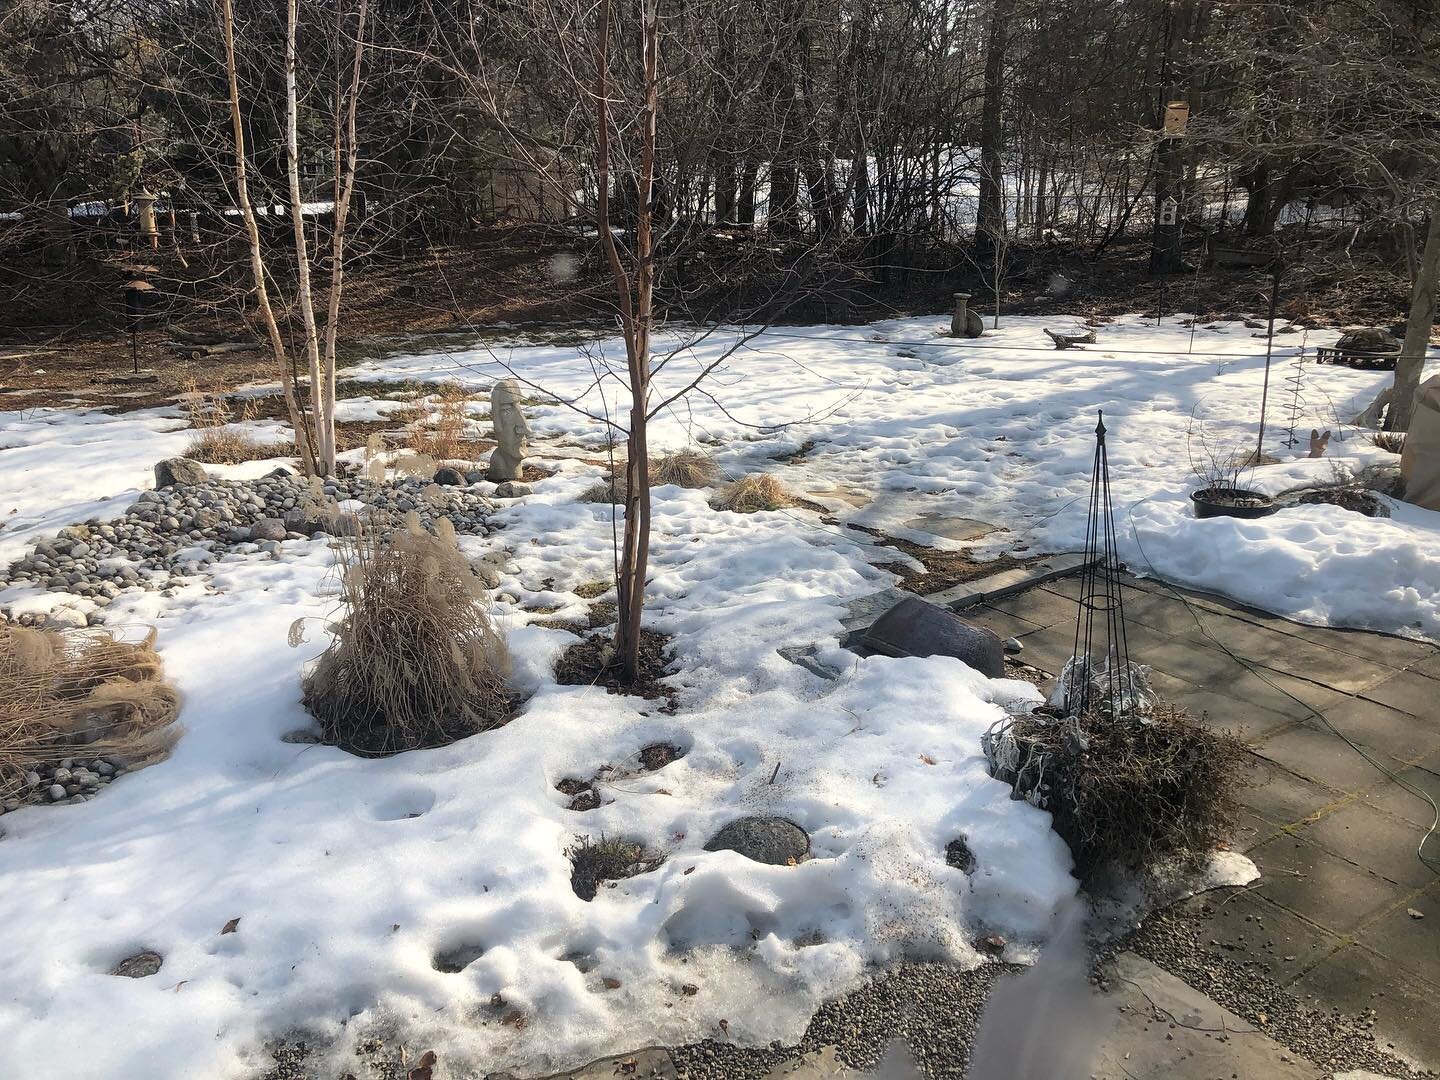 Still lots of snow here but going up to 17 today and 19 degrees tomorrow. #spring #snow #canadianwinter #garden #woodland